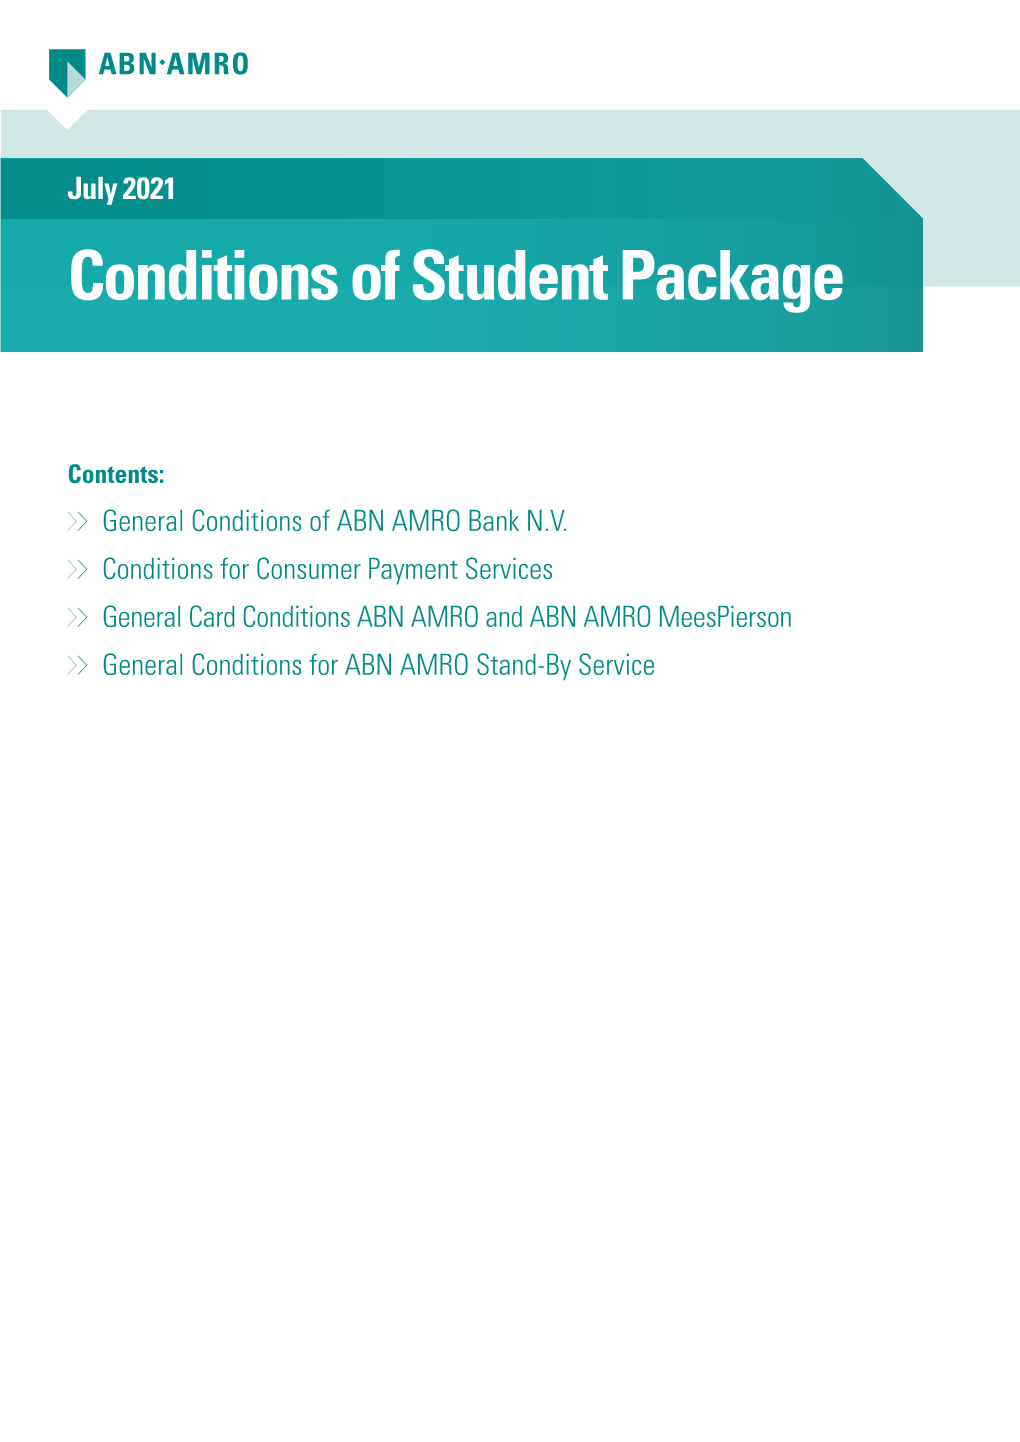 Conditions of Student Package